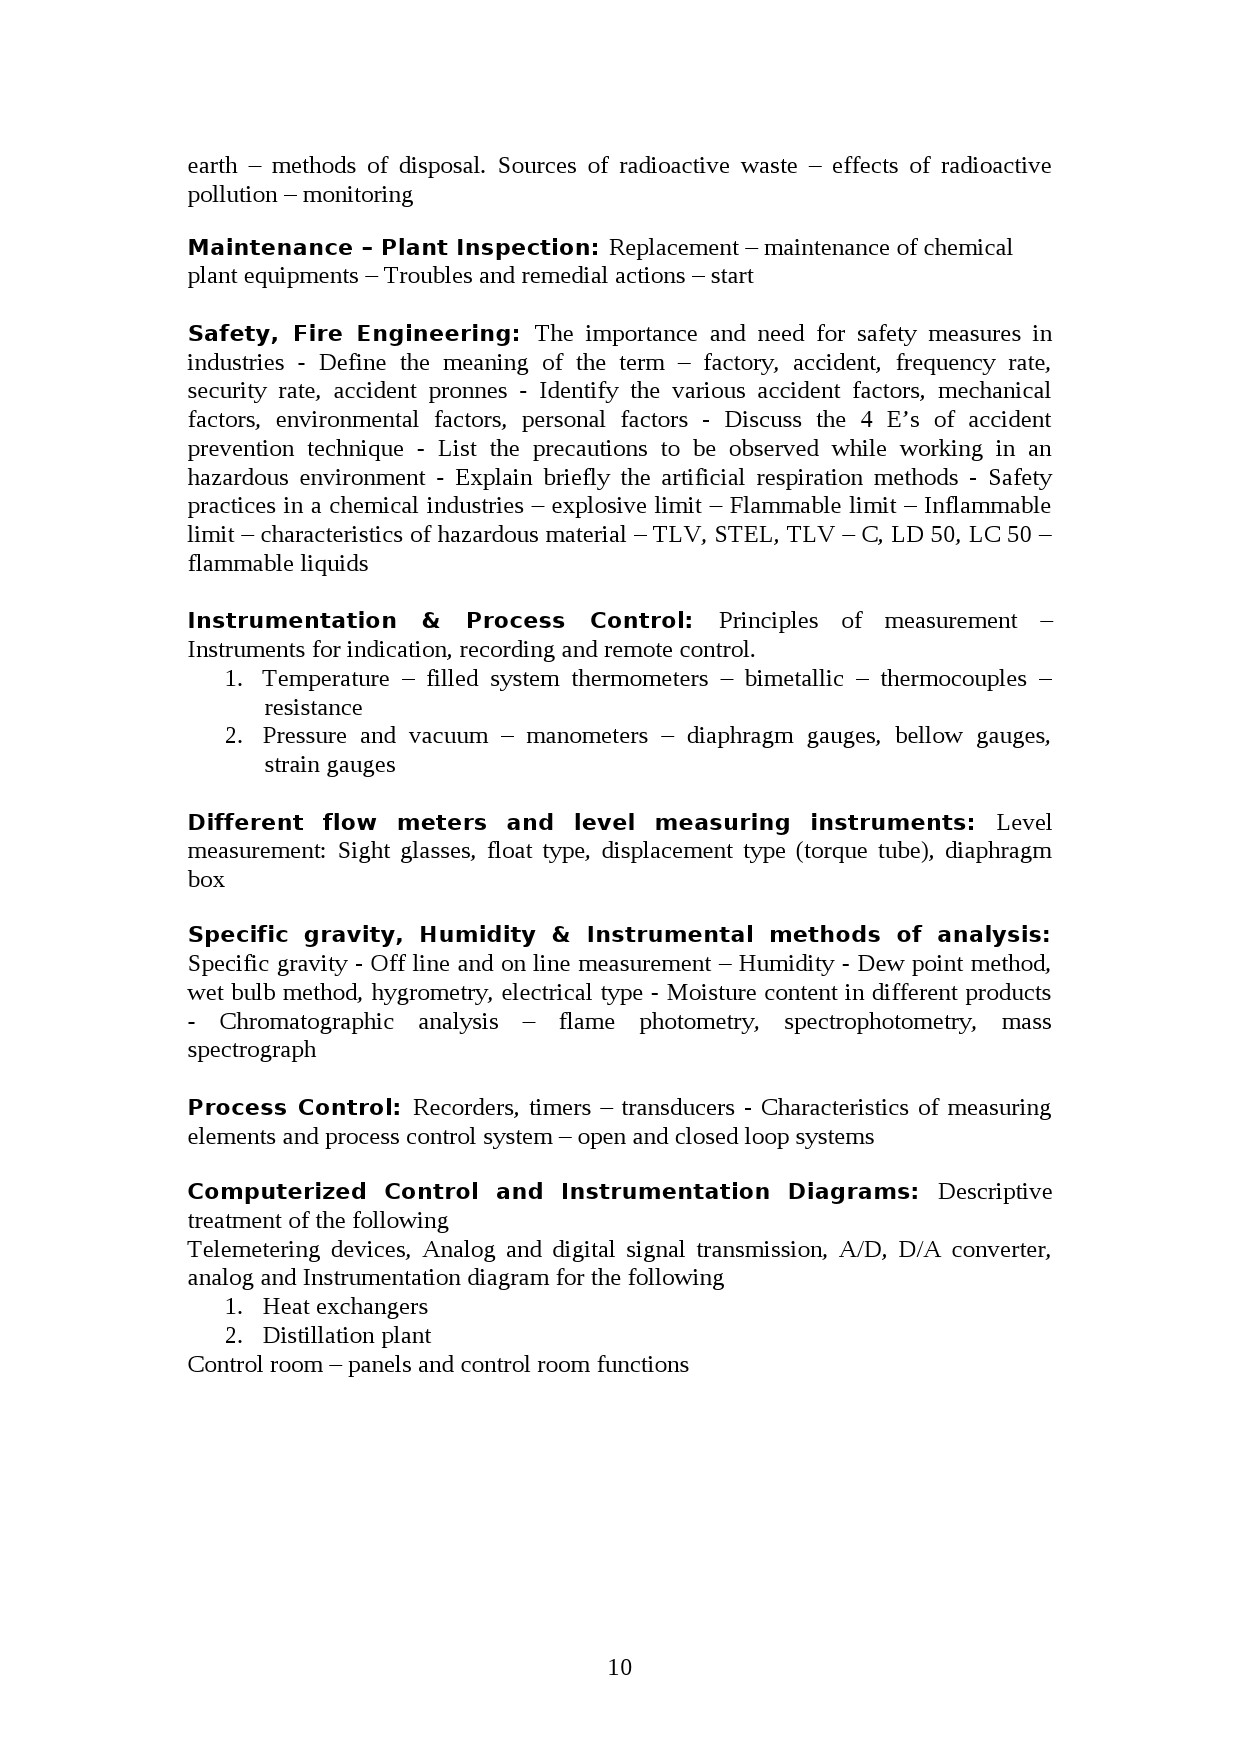 Chemical Engineering Lecturer in Polytechnic Exam Syllabus - Notification Image 10